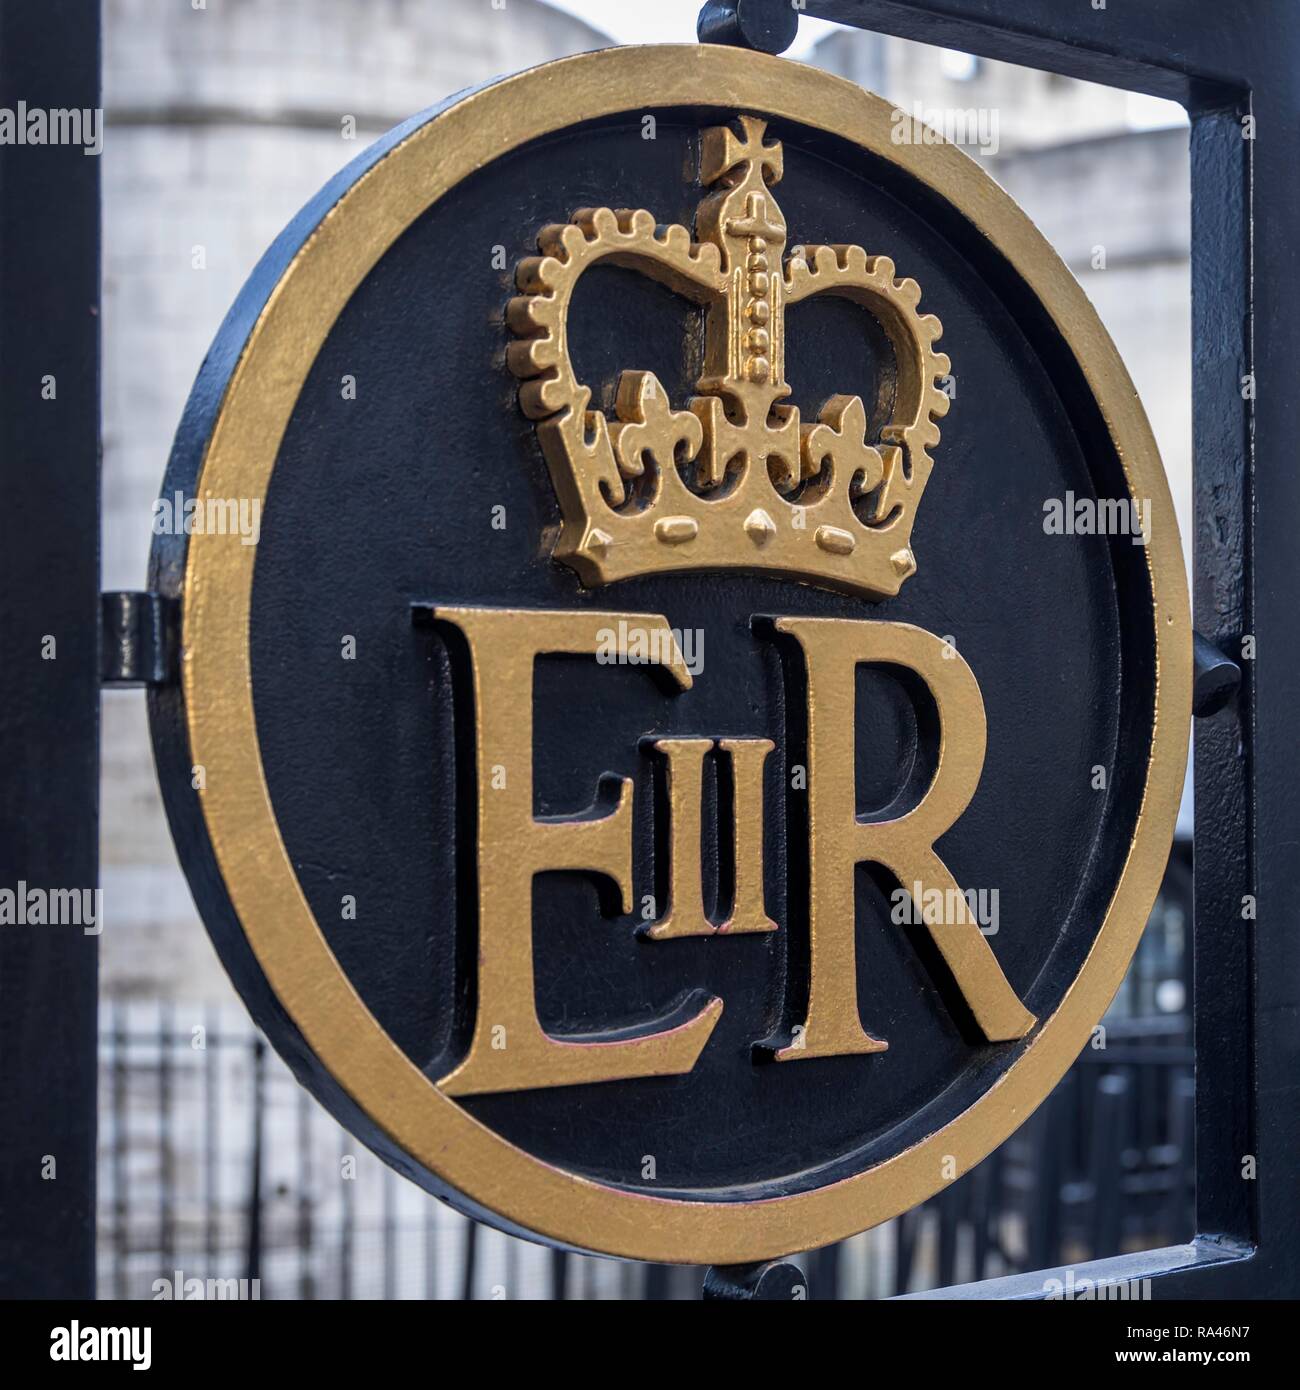 Sign of Queen Elizabeth II at a gate at the Tower of London, London, Great Britain Stock Photo